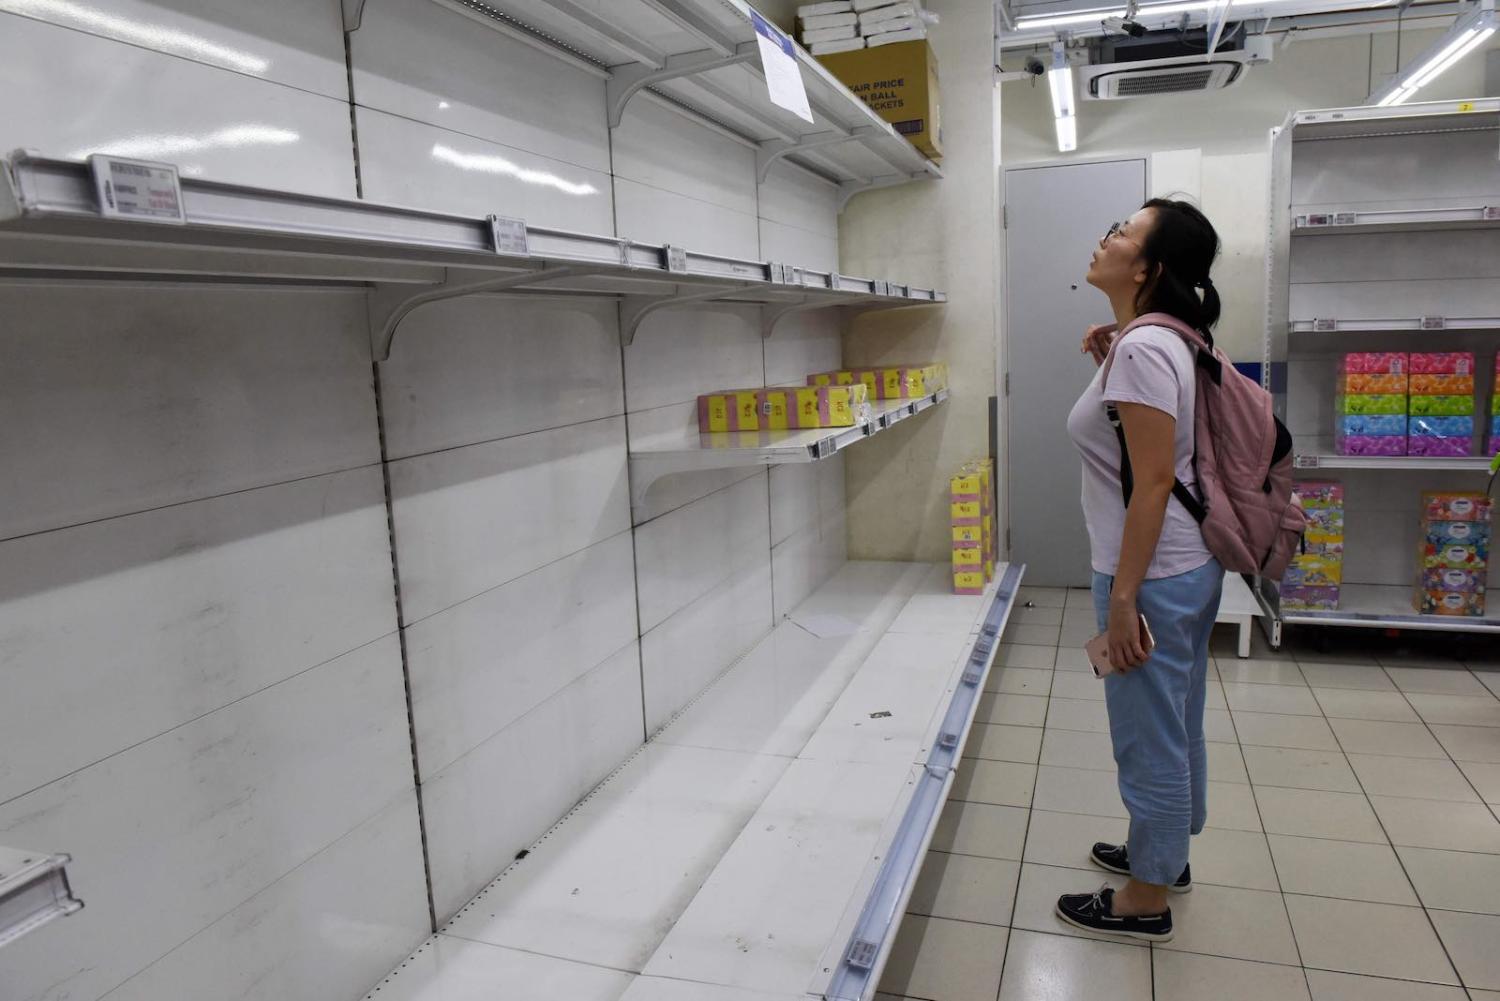 Empty shelves at a Singapore supermarket as the Covid pandemic spread in March 2020 (Catherine Lai/AFP via Getty Images)